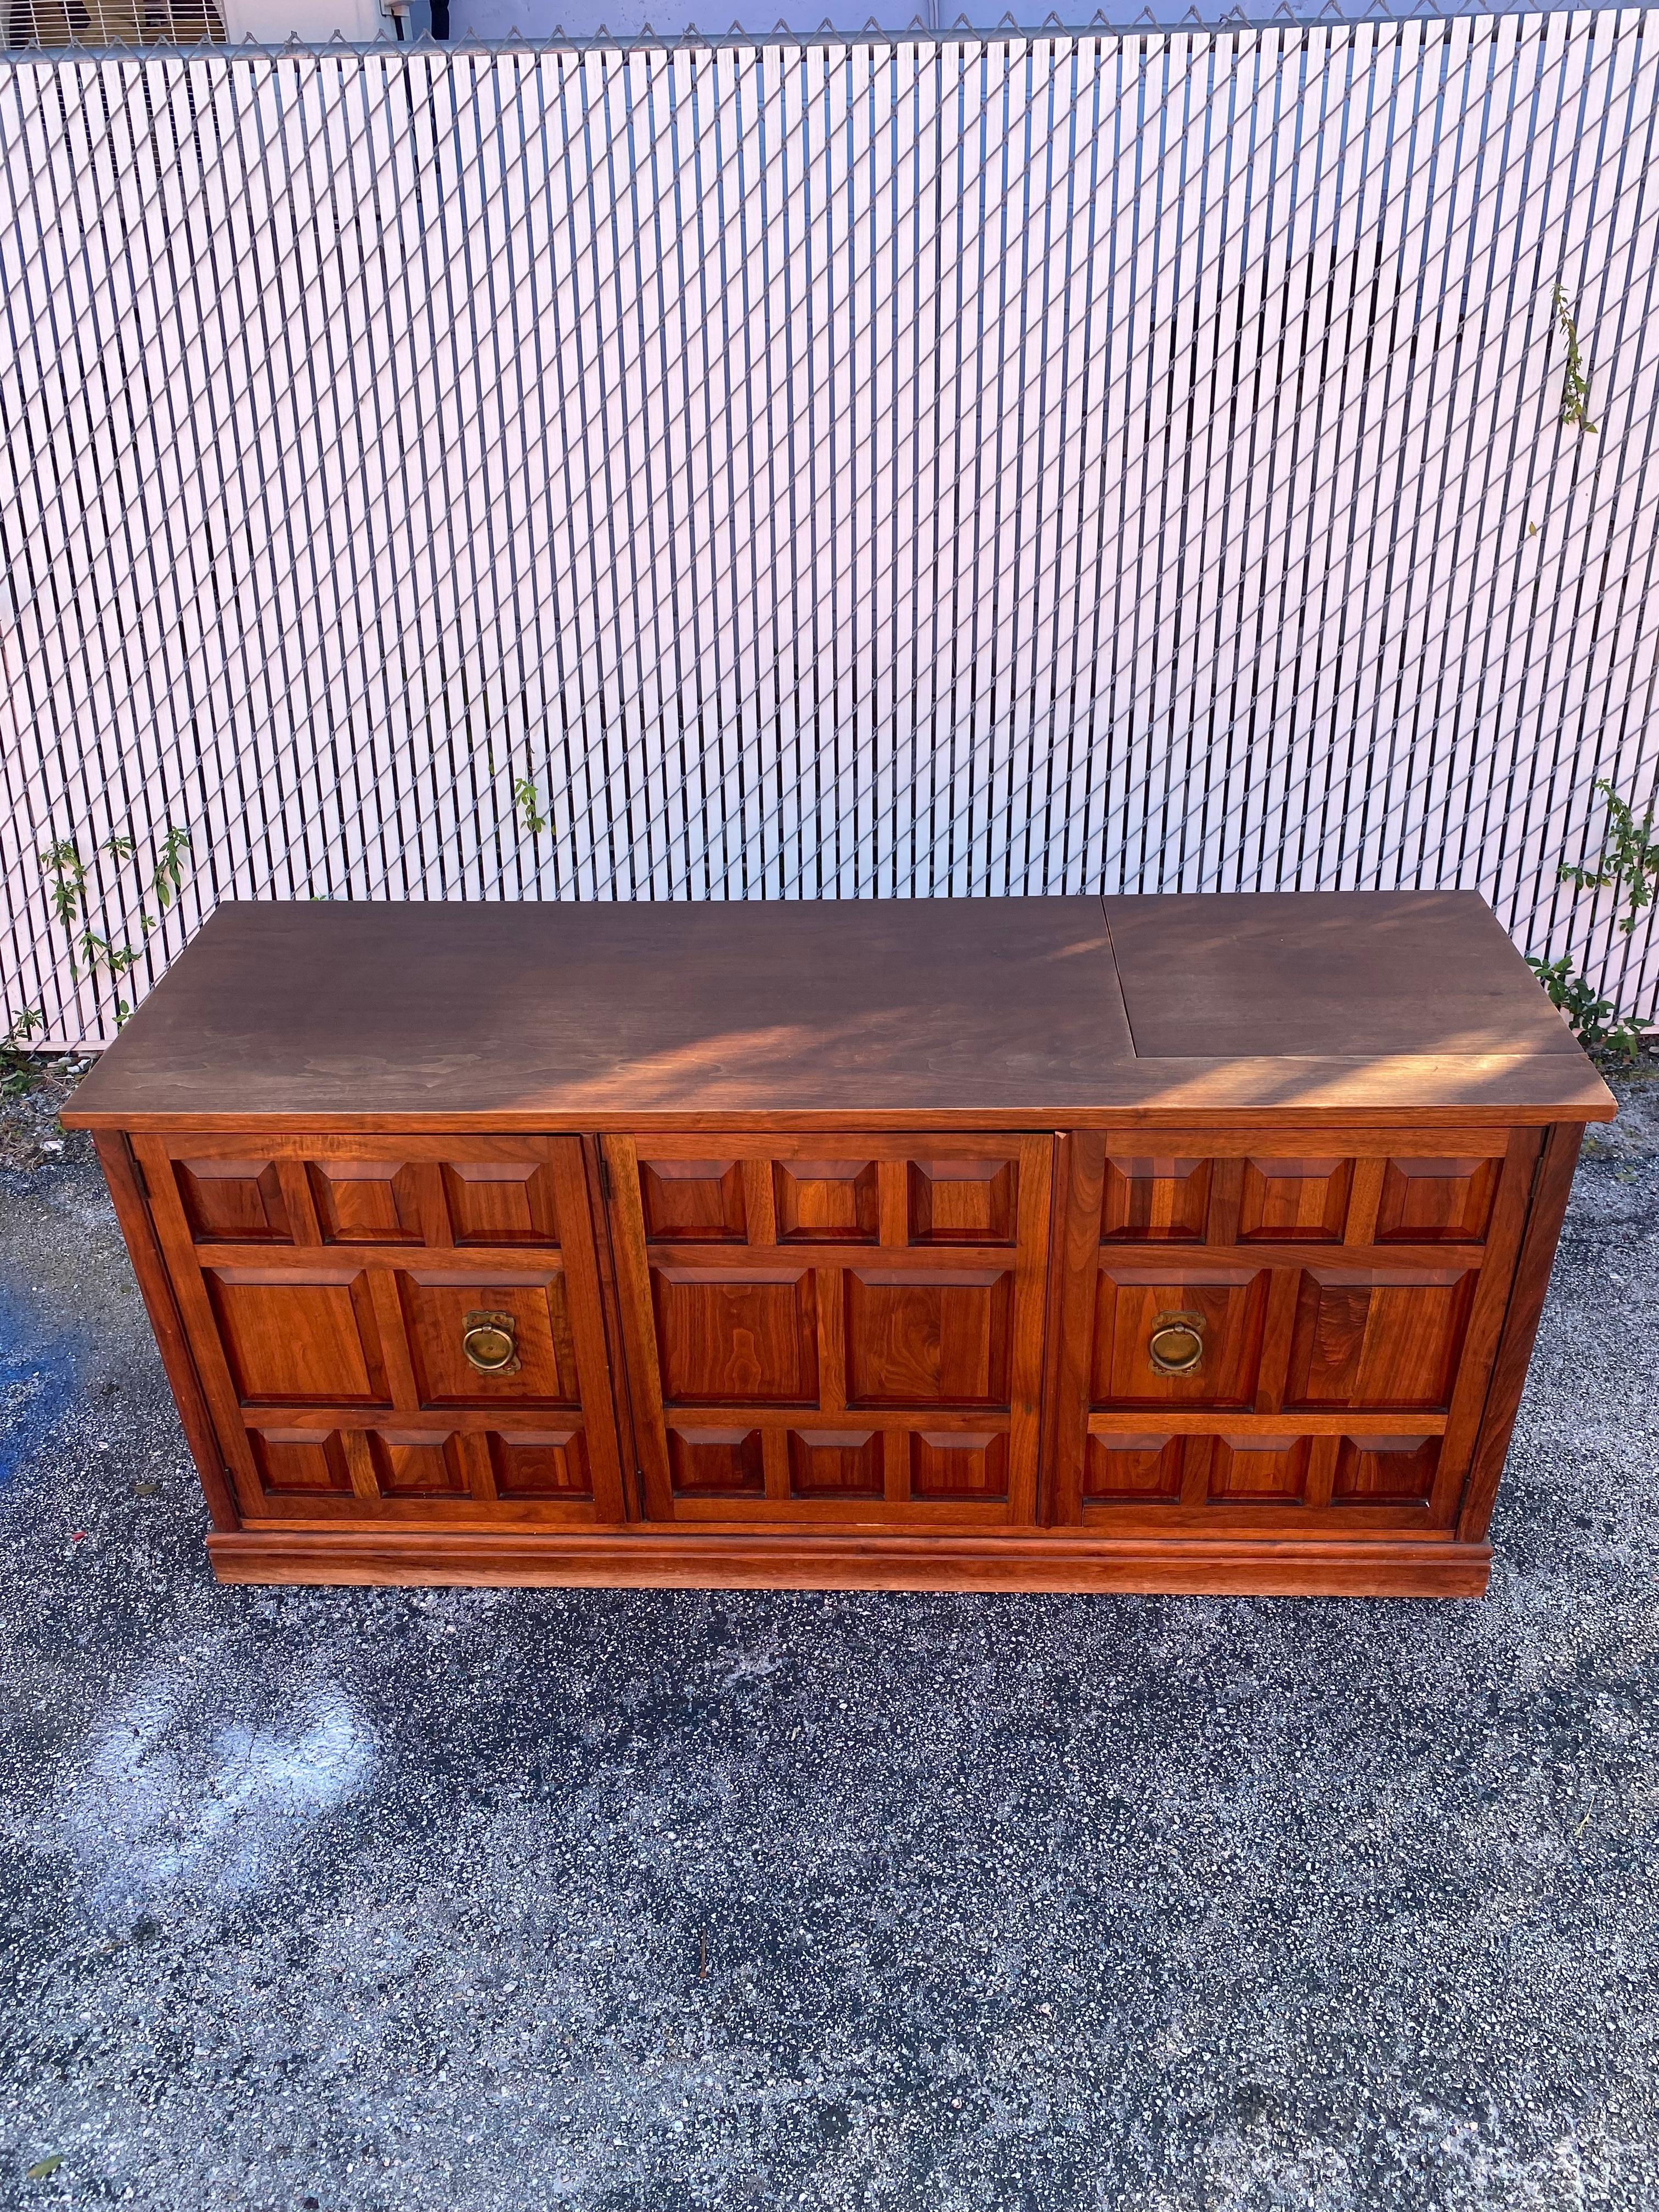 Mid-20th Century 1960s Widdicomb Spanish Baroque Style Wood SideBoard Storage Cabinet For Sale